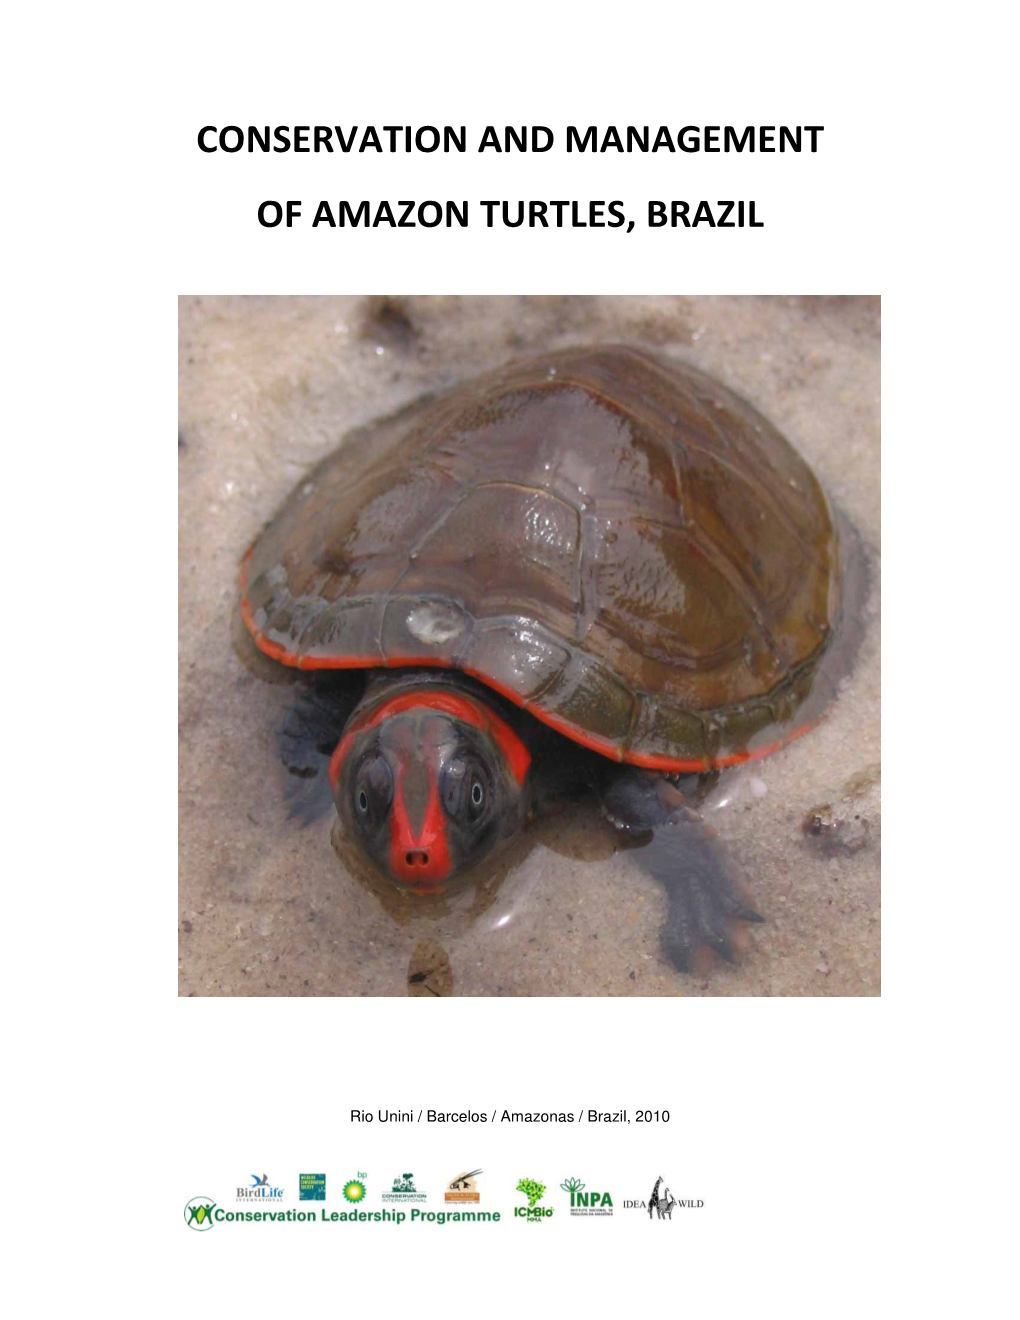 Conservation and Management of Amazon Turtles, Brazil